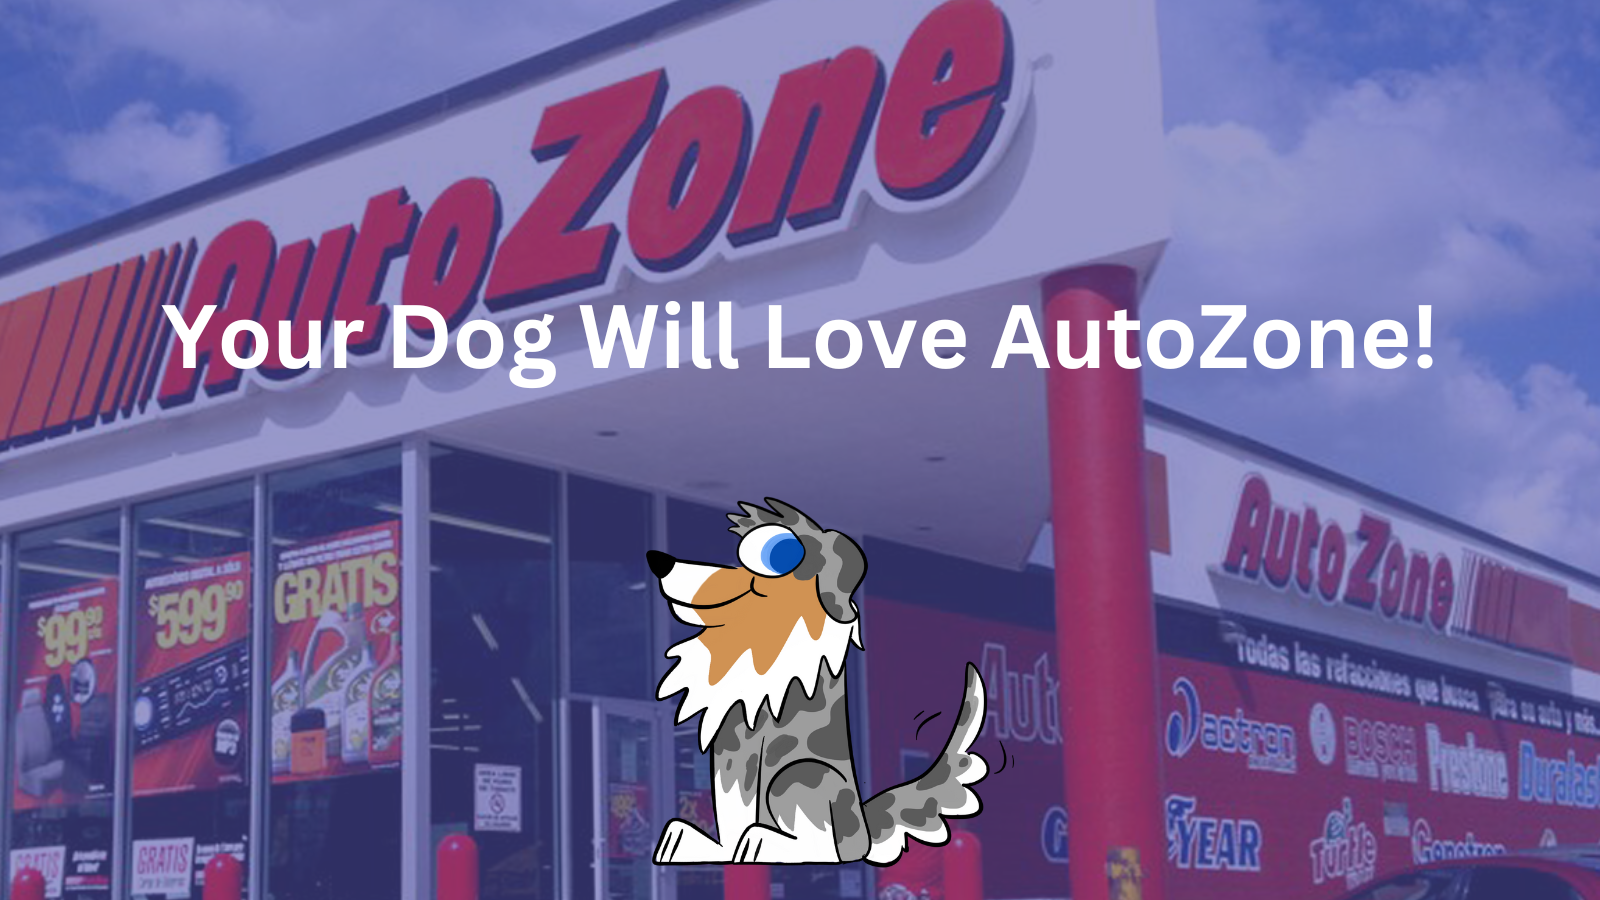 AutoZone pet stores are allowed